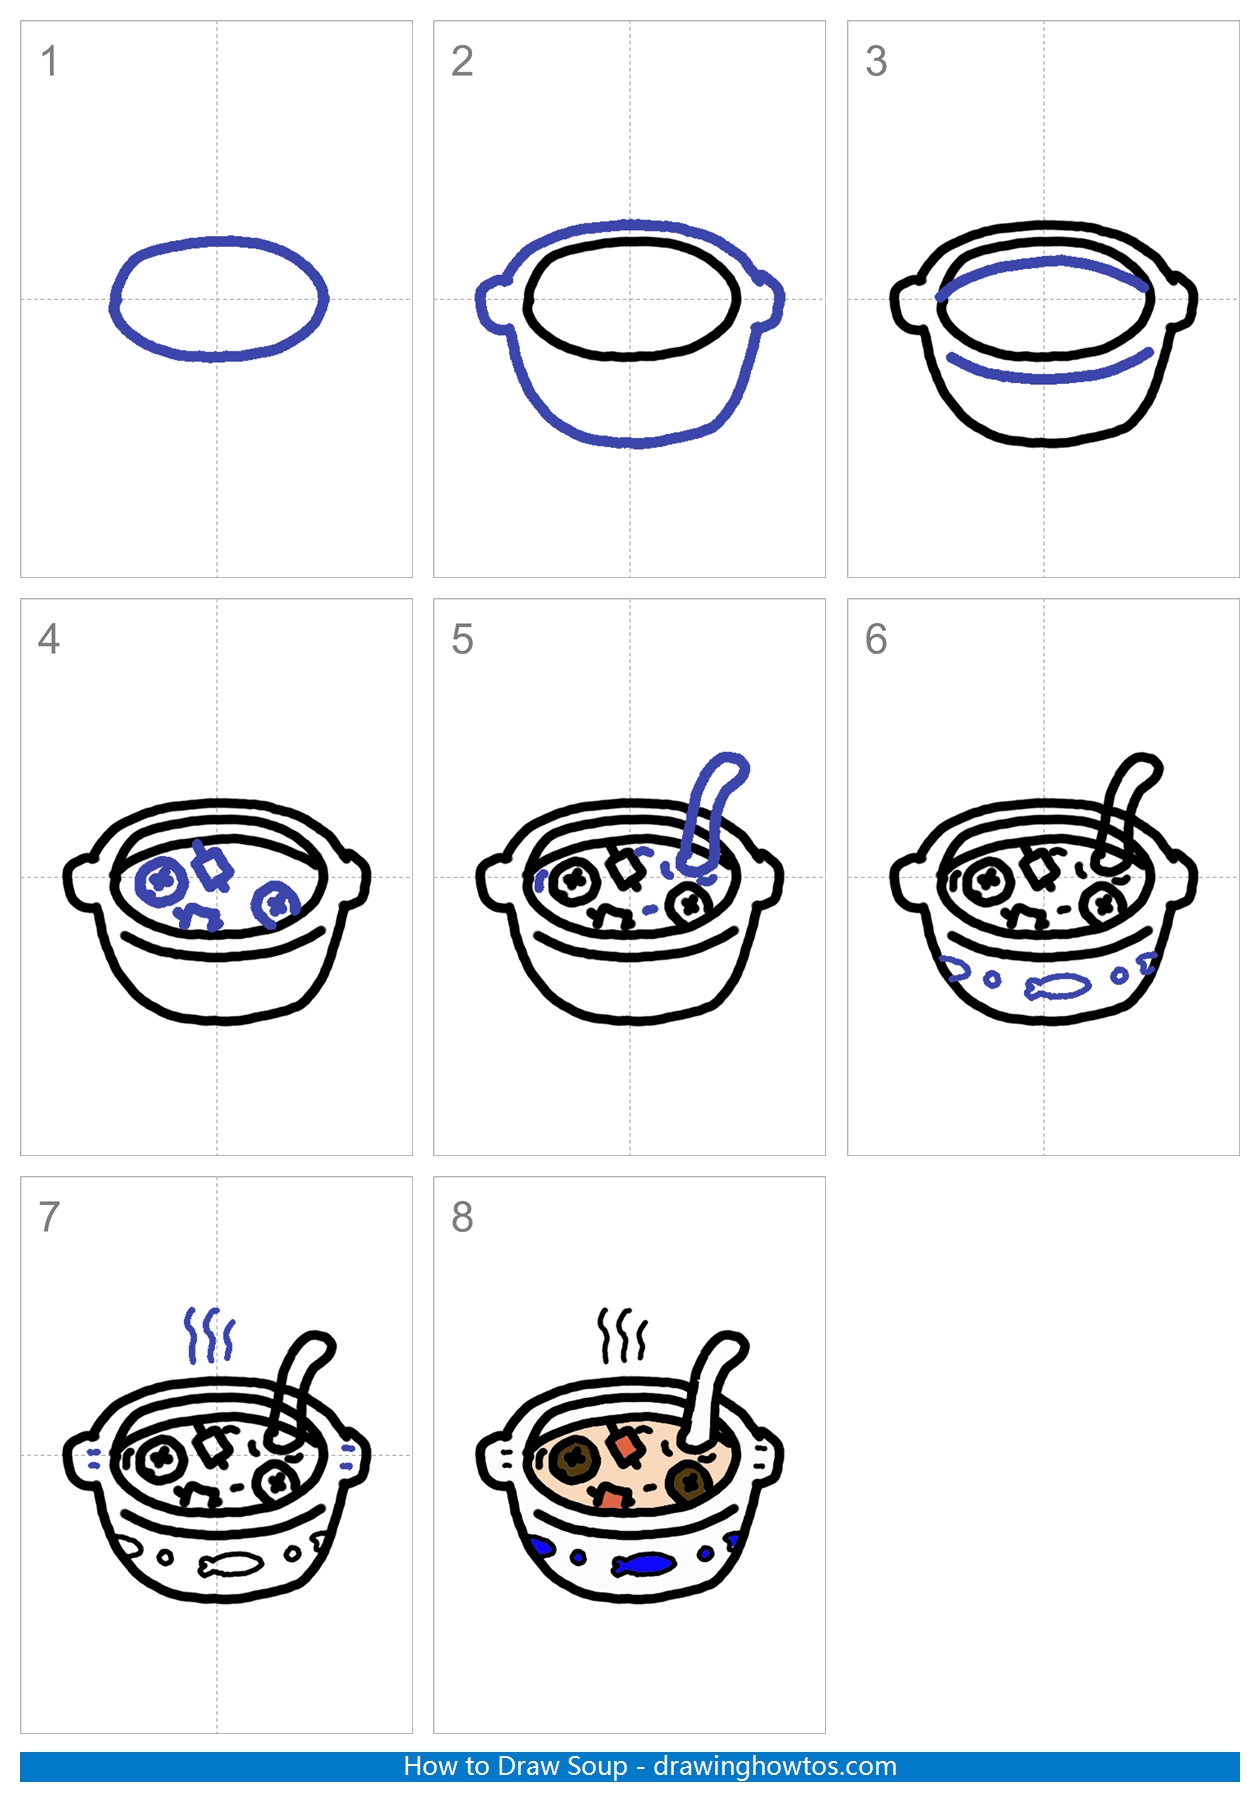 How to Draw a Pot of Soup Step by Step